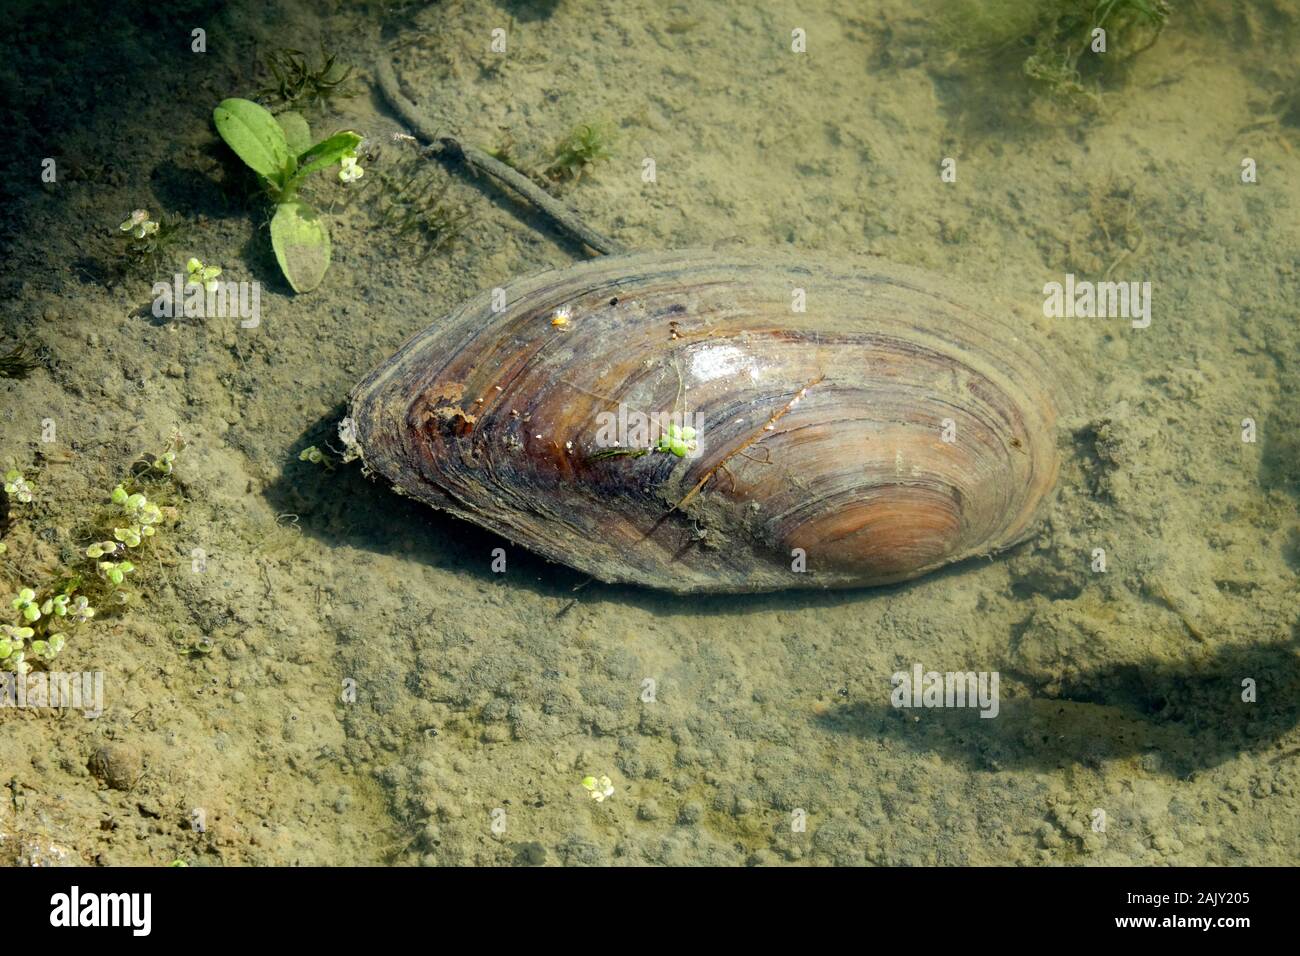 Swan Mussel in fresh water pond Stock Photo